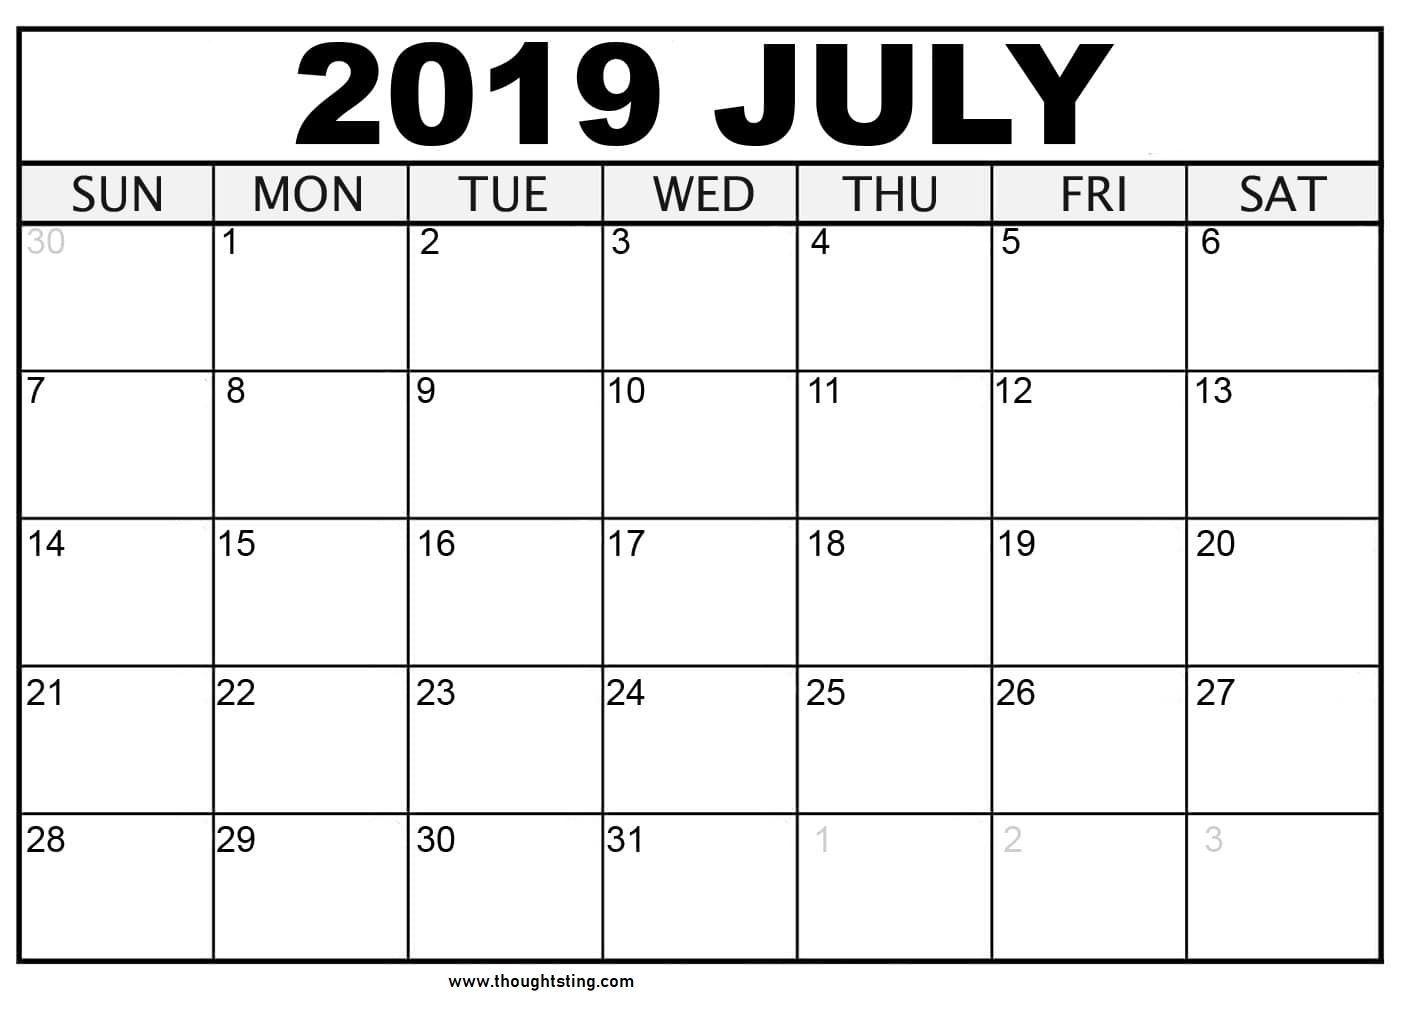 Free Printable July 2019 Calendar Download | Printable intended for 2019 Free Printable Calendars Without Downloading